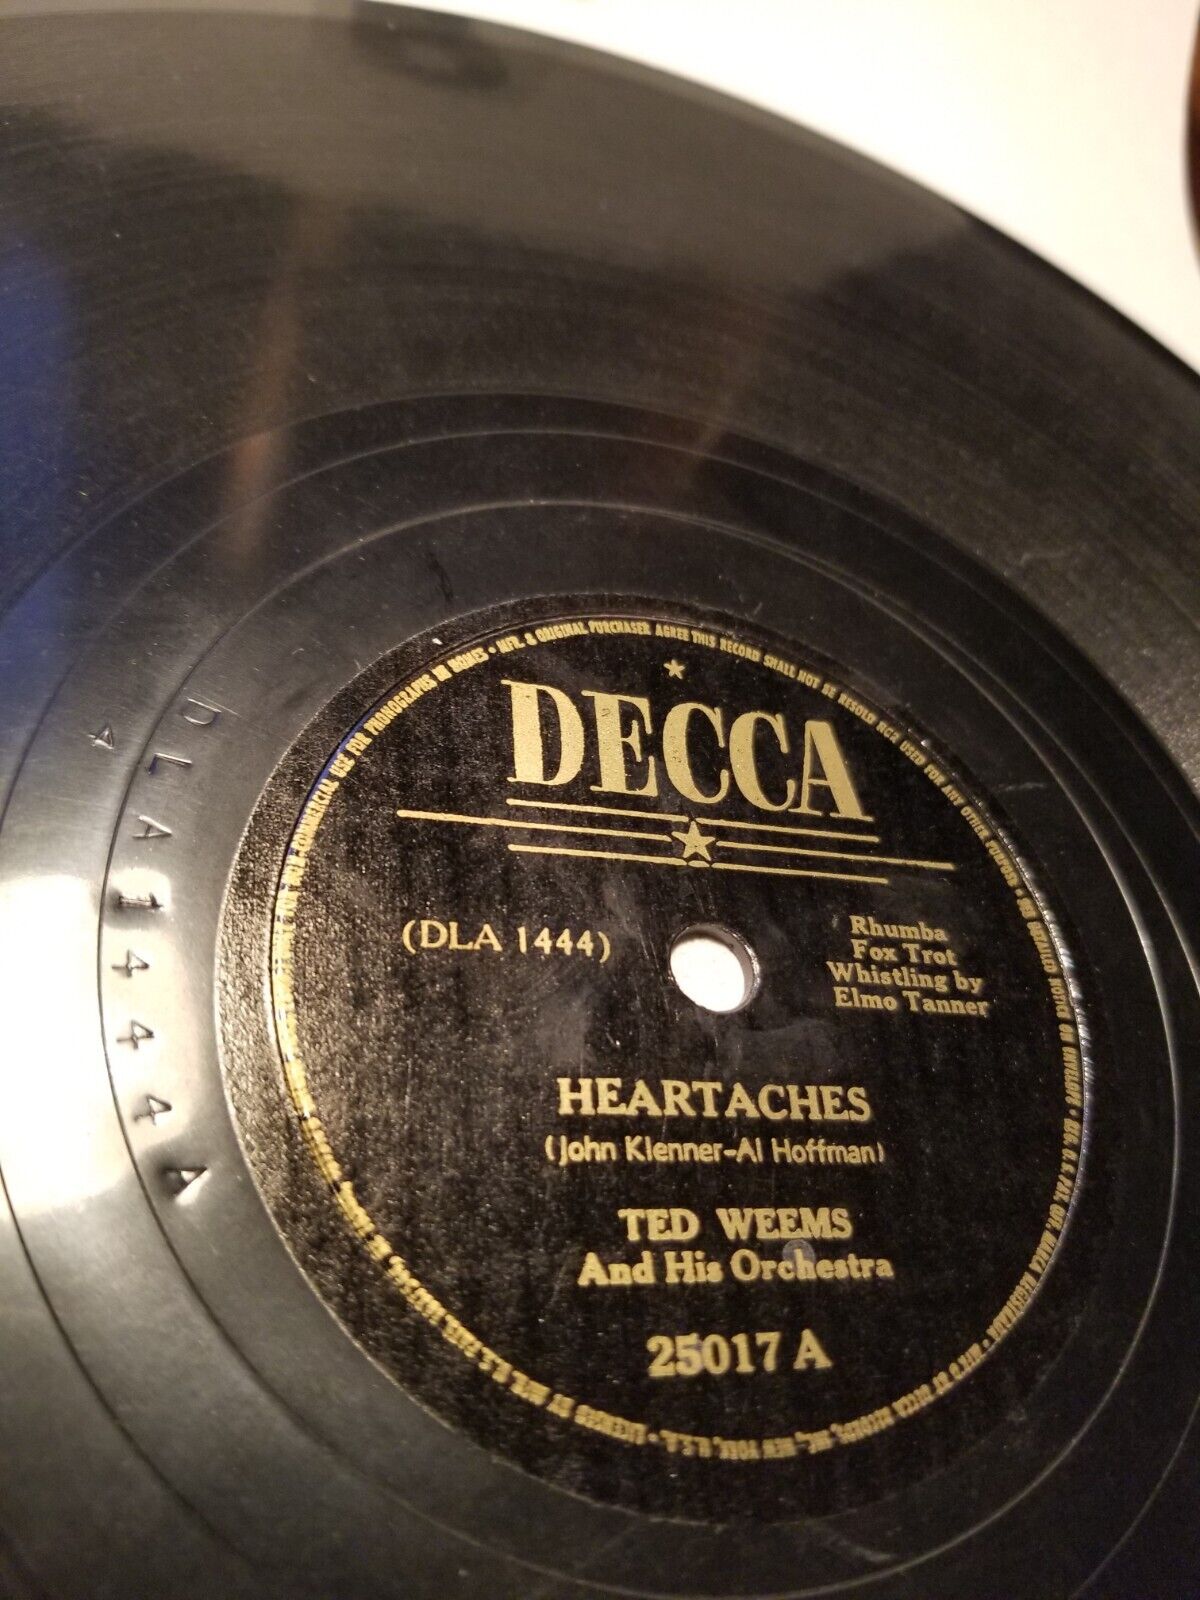 TED WEEMS HEARTACHES /OH MONAH DECCA RECORDS 78 25017